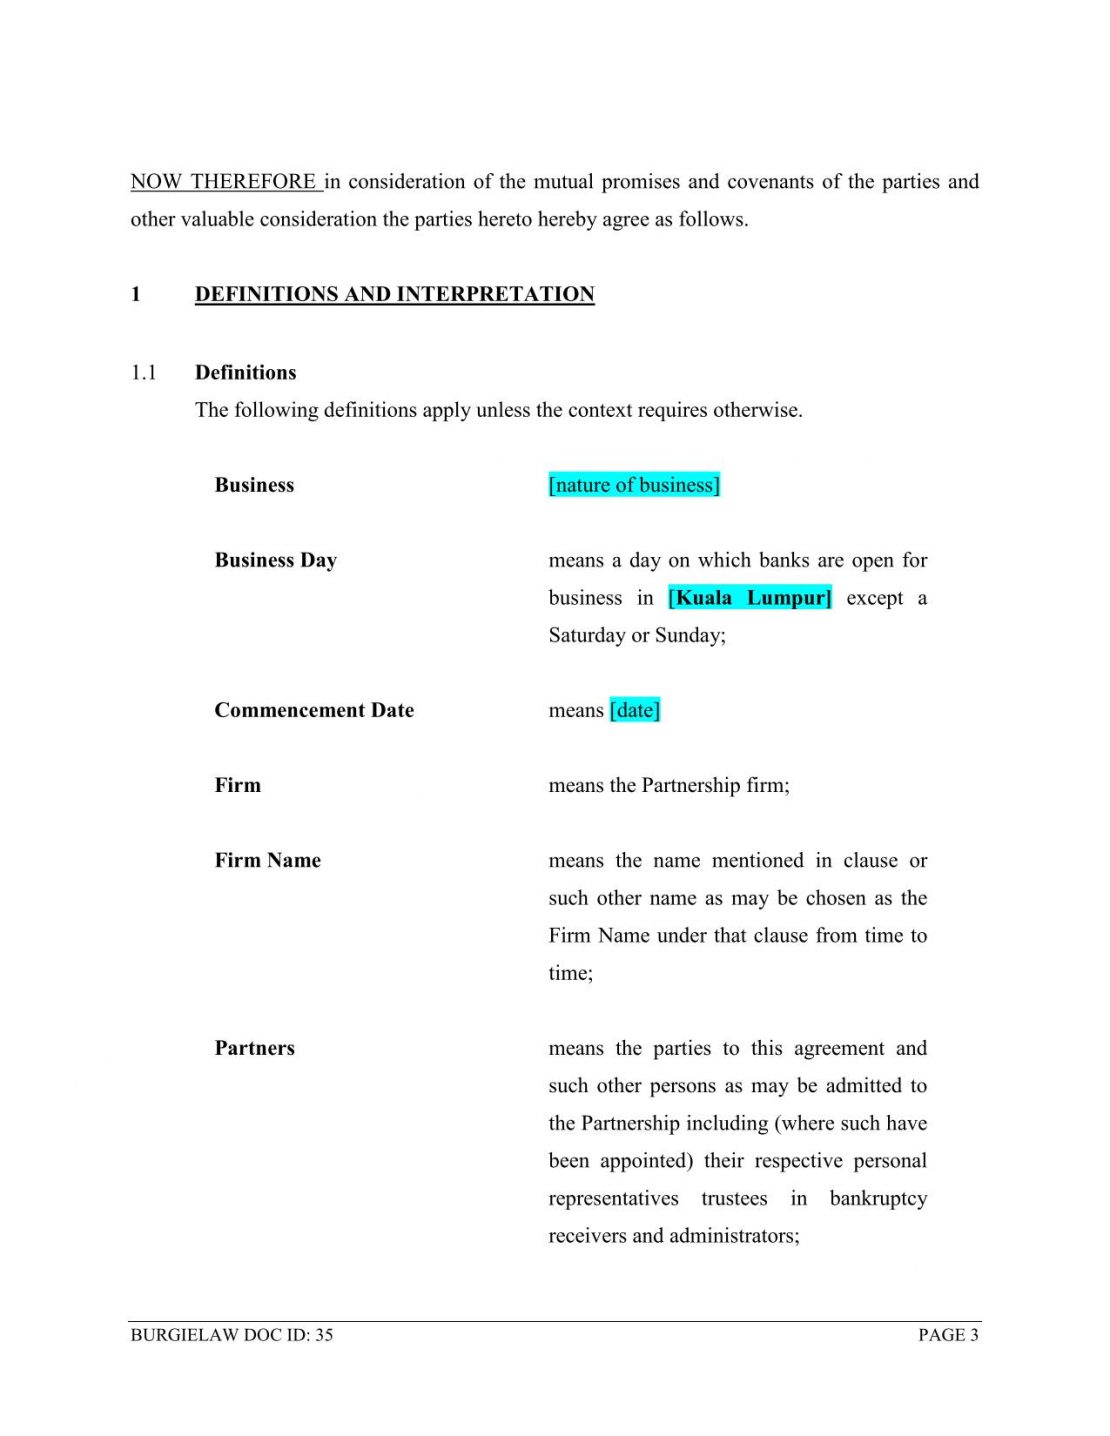 business-partnership-agreement-template-burgielaw